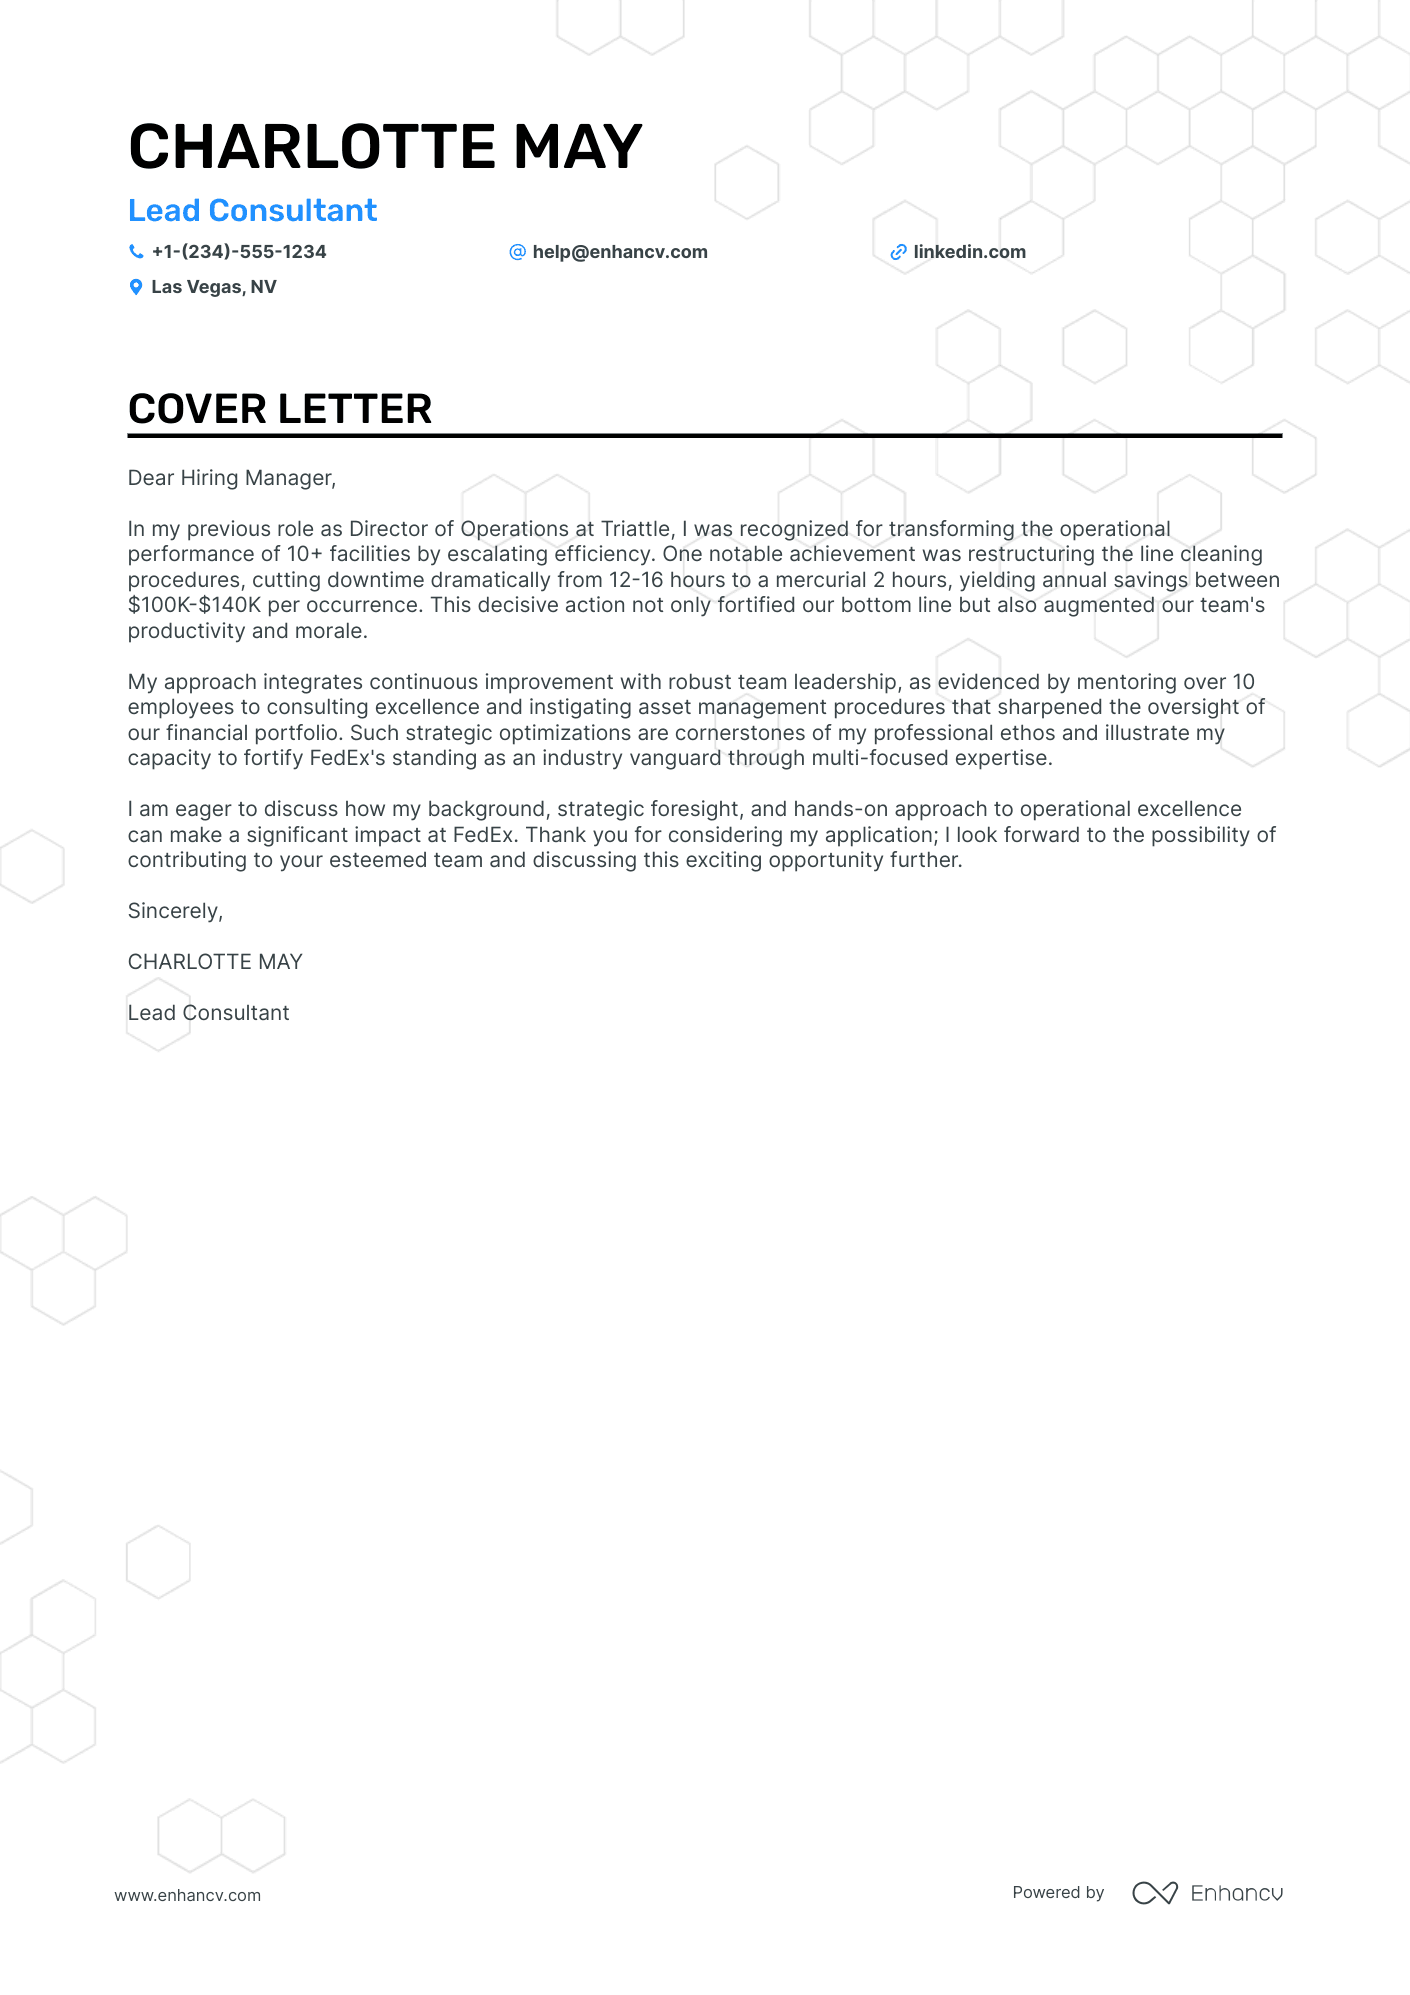 Fedex cover letter